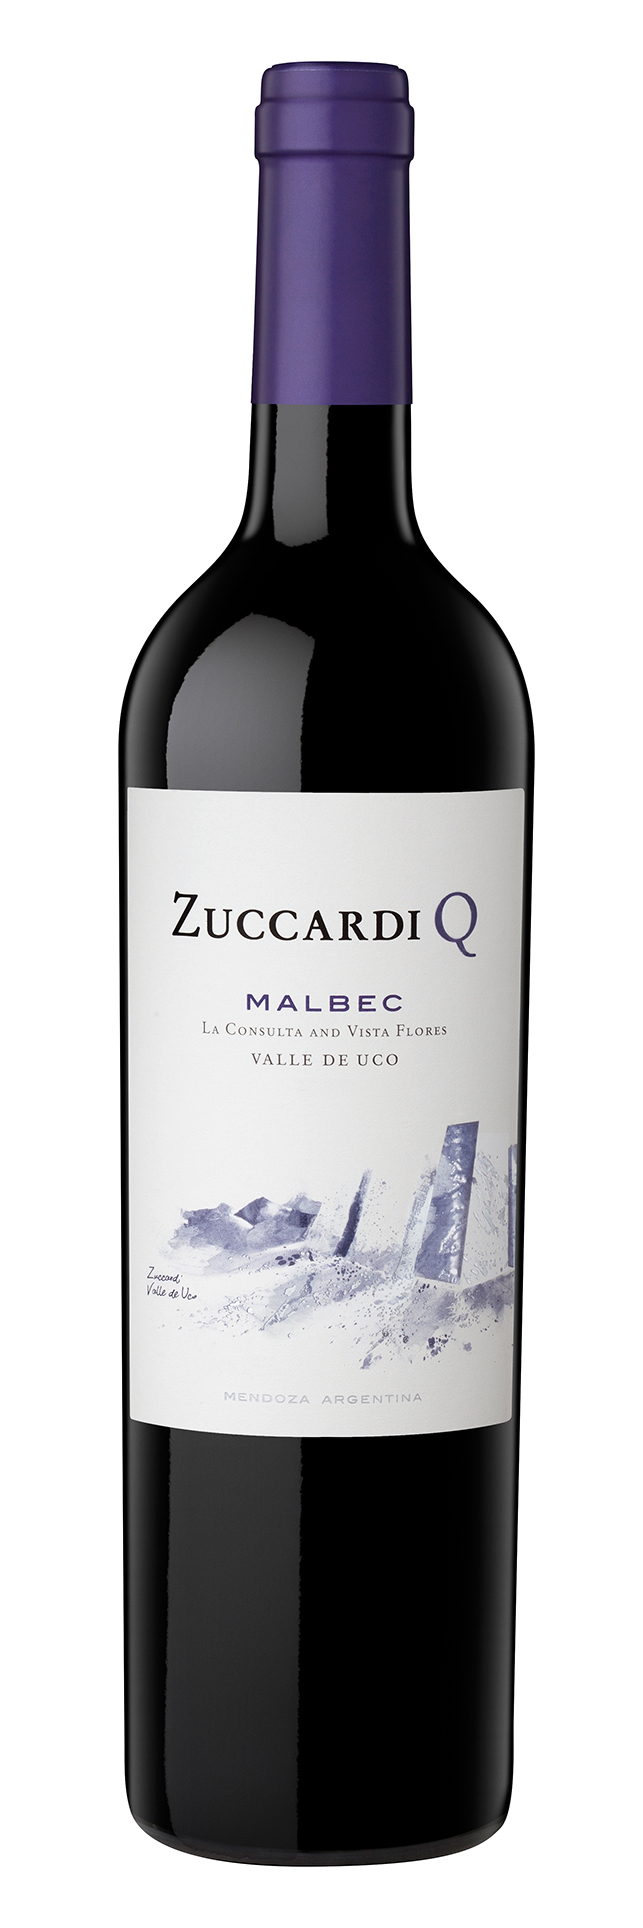 Zuccard Q Malbec - with intense red and black fruit aromas by Winesellers Ltd.